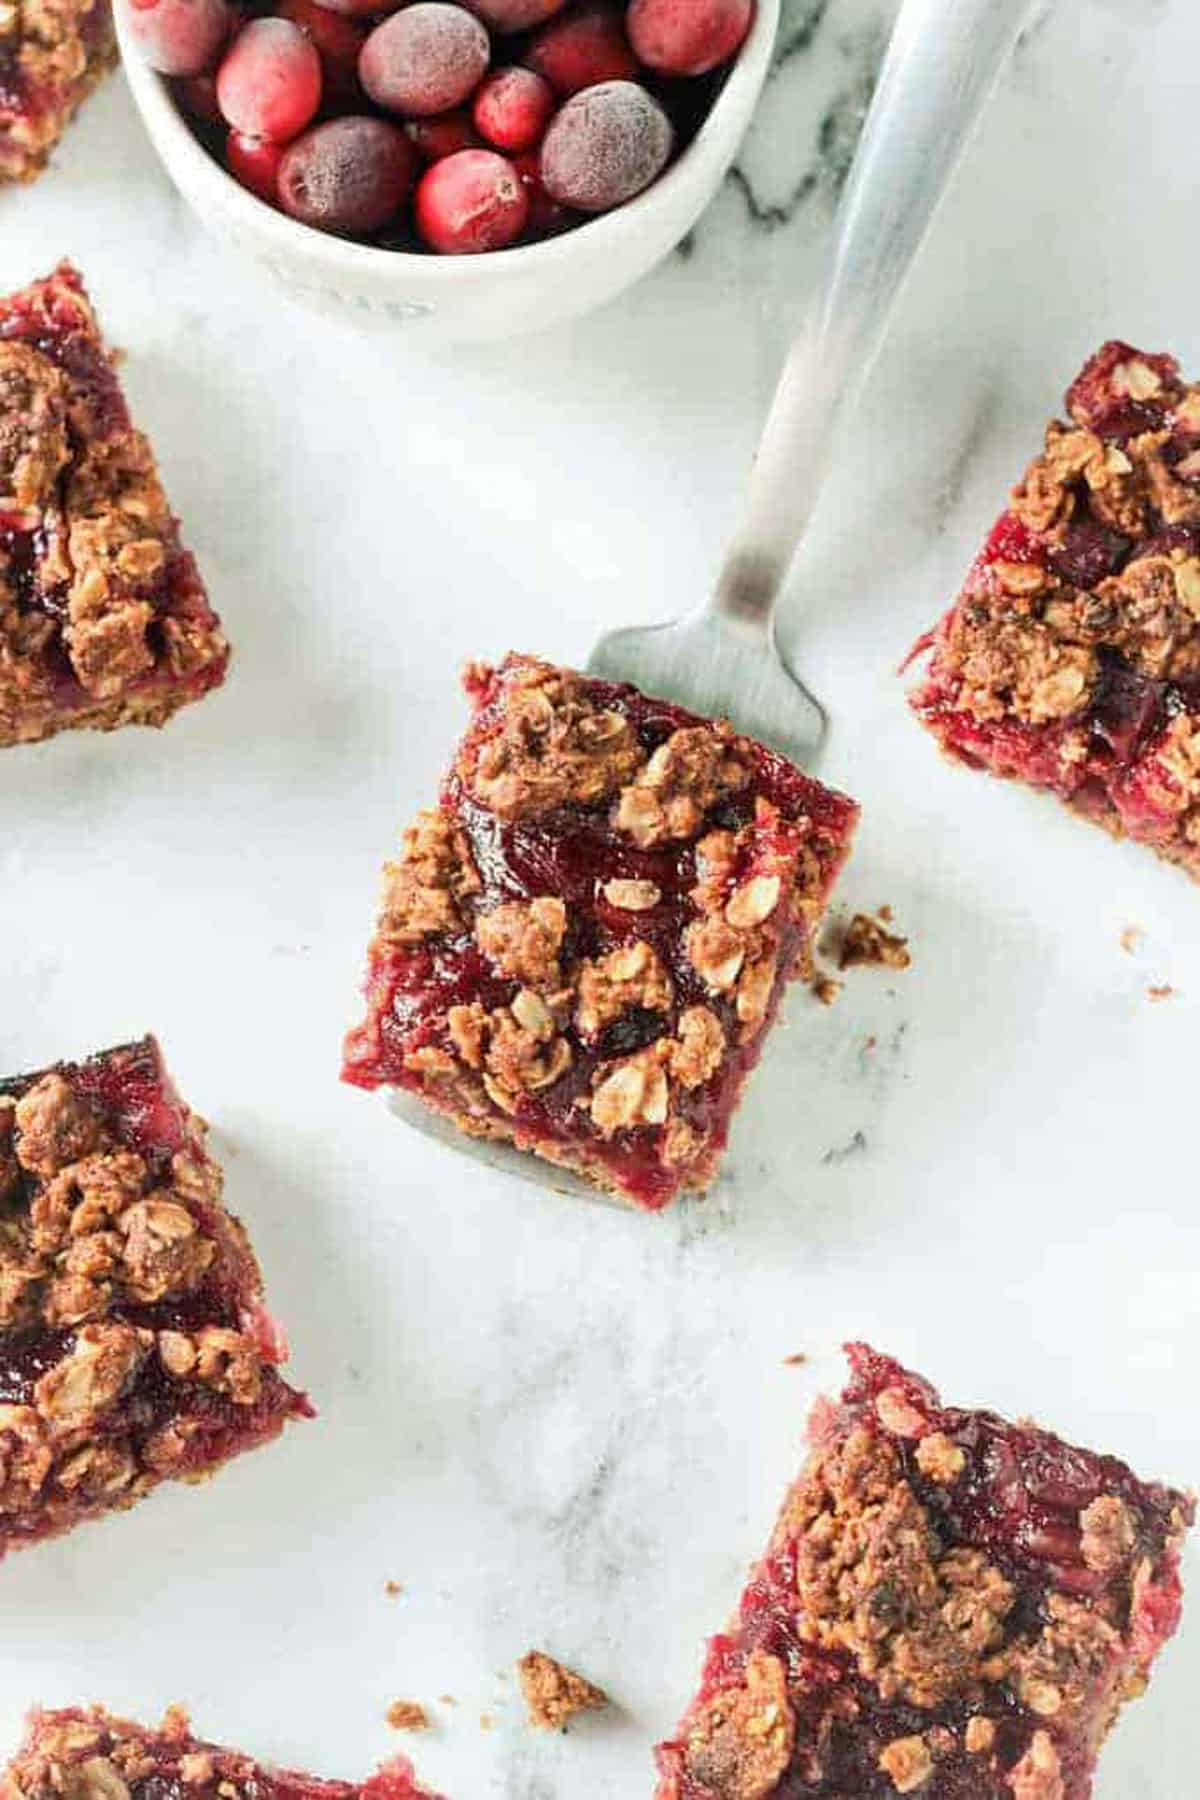 One cranberry oat crumble bar on a metal spatula.